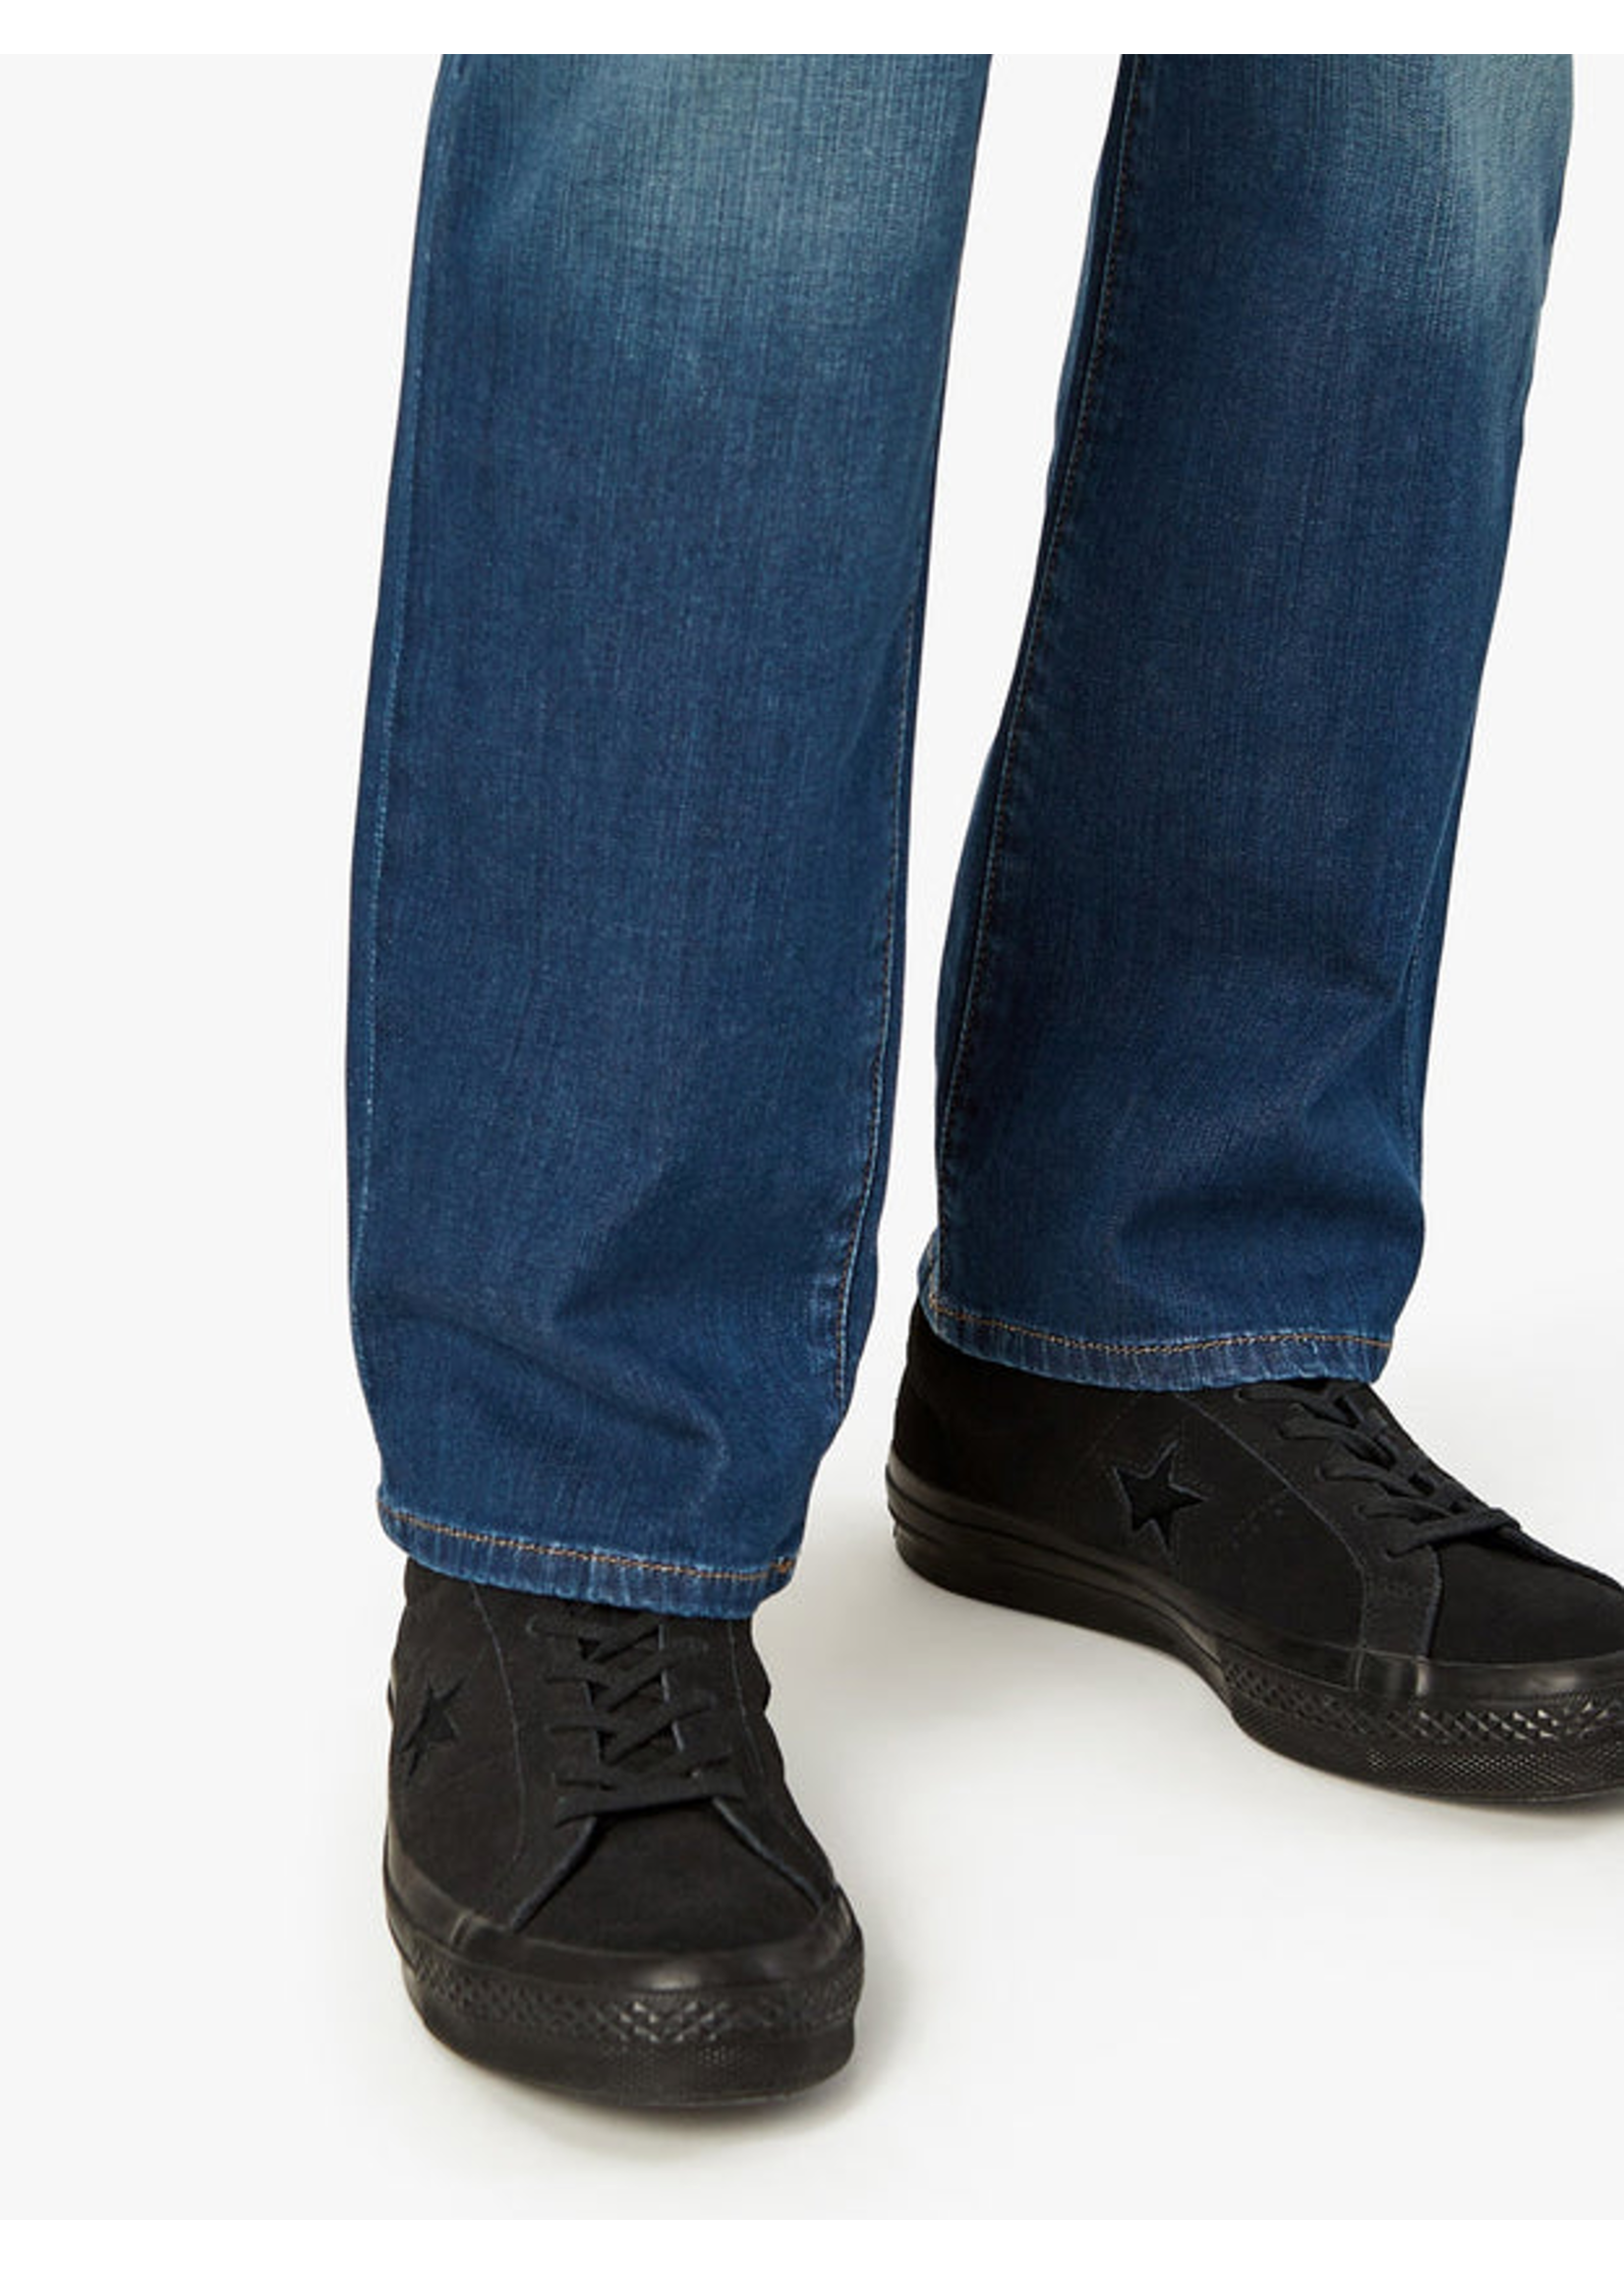 34 HERITAGE 'Charisma' Relaxed Straight Jean in Mid Cashmere